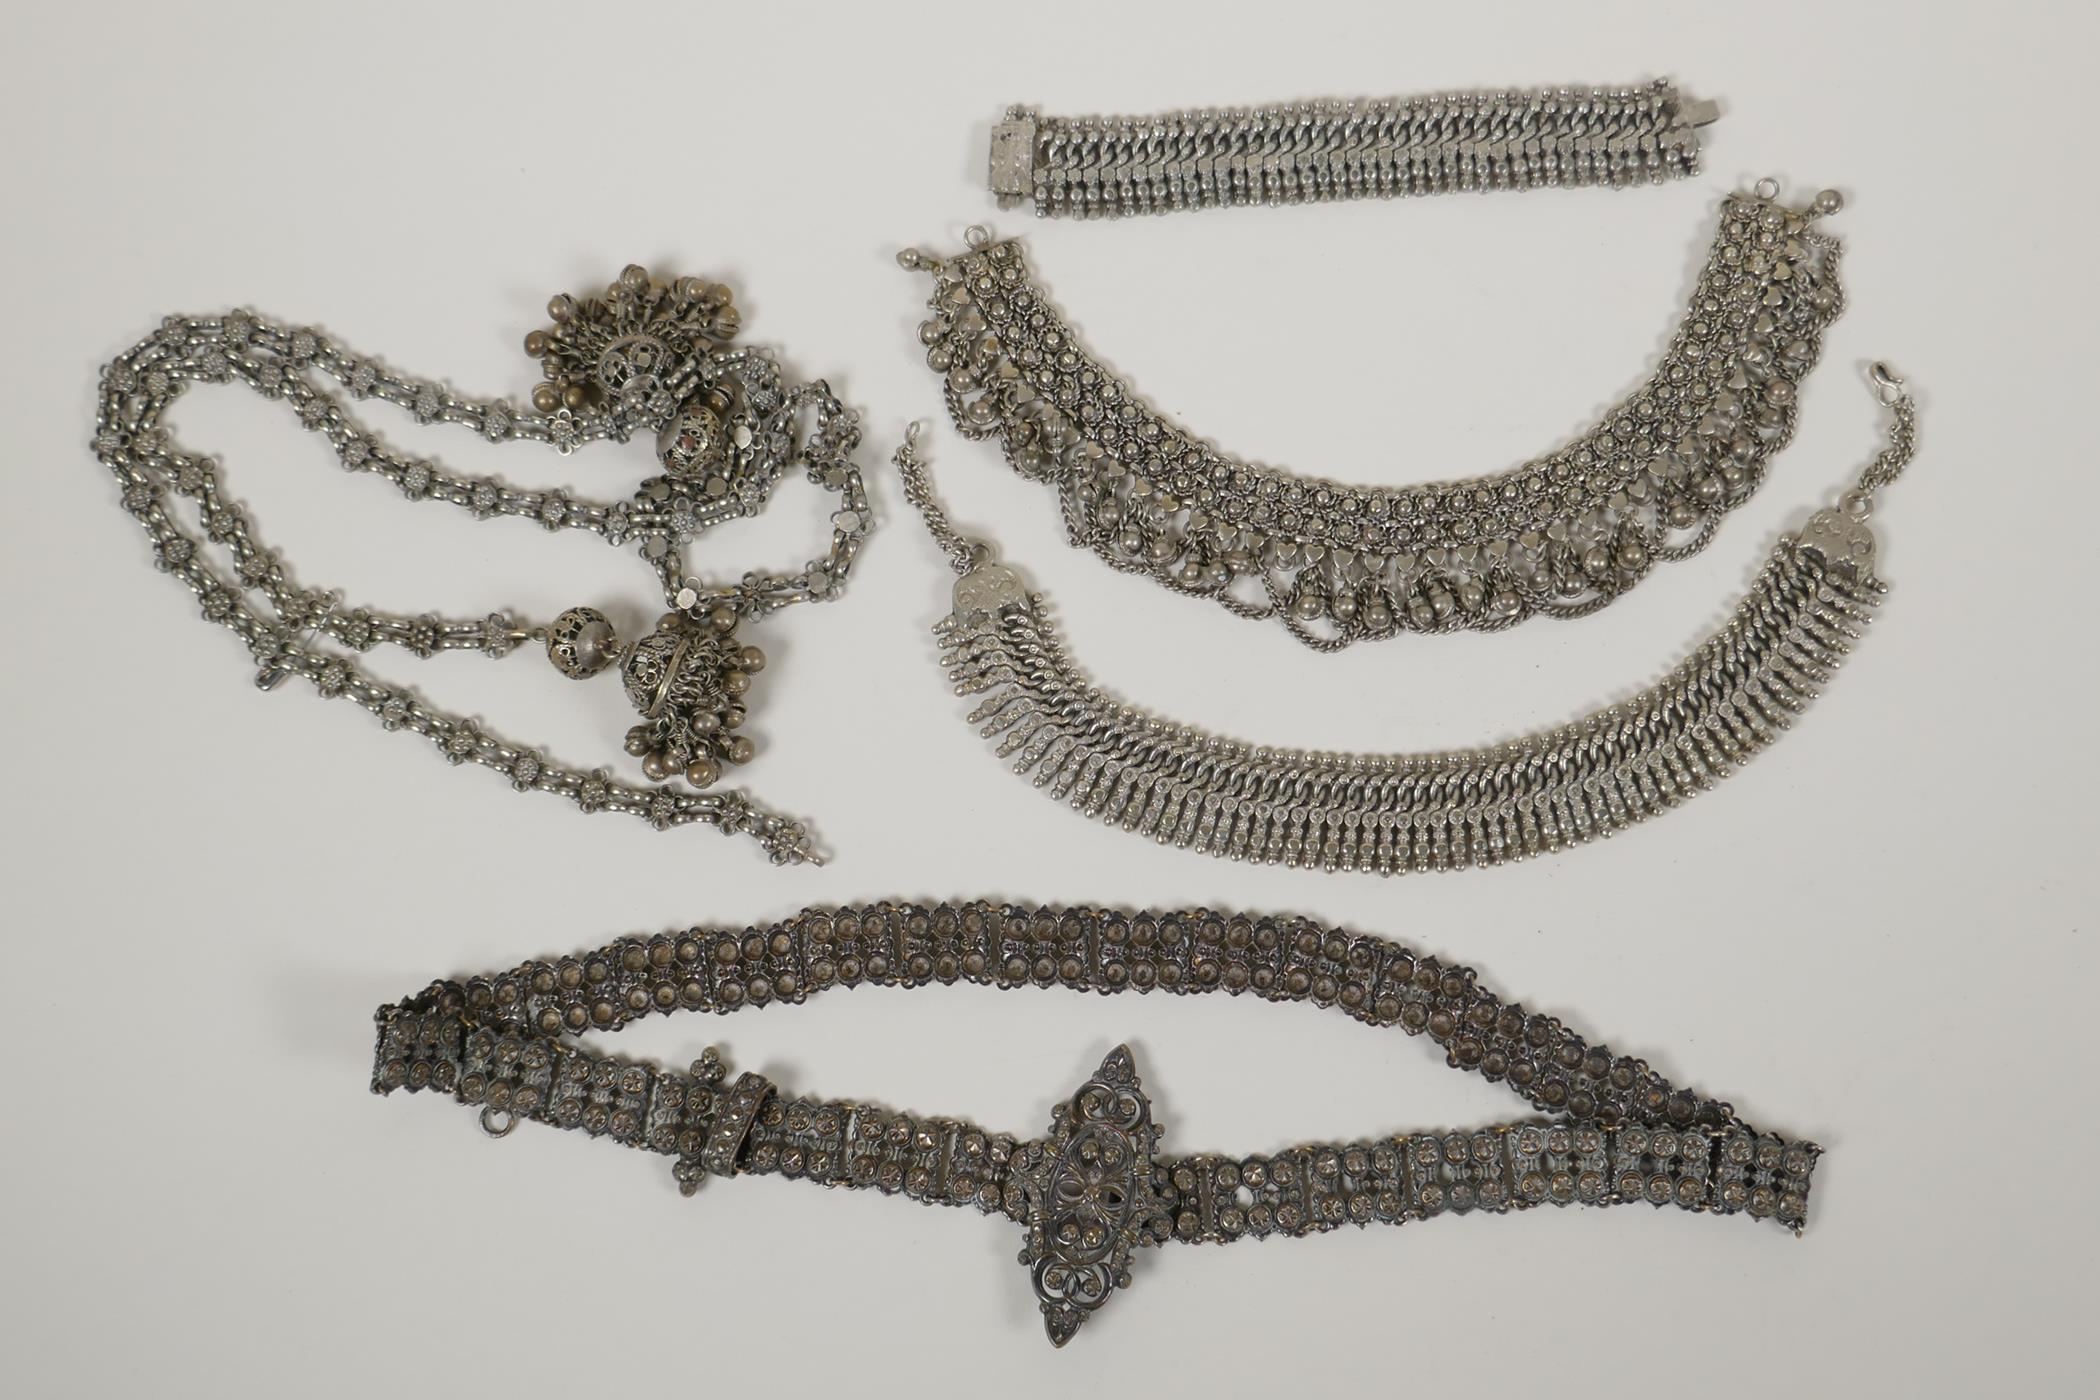 A collection of Indian white metal jewellery including bracelets, necklaces and belts